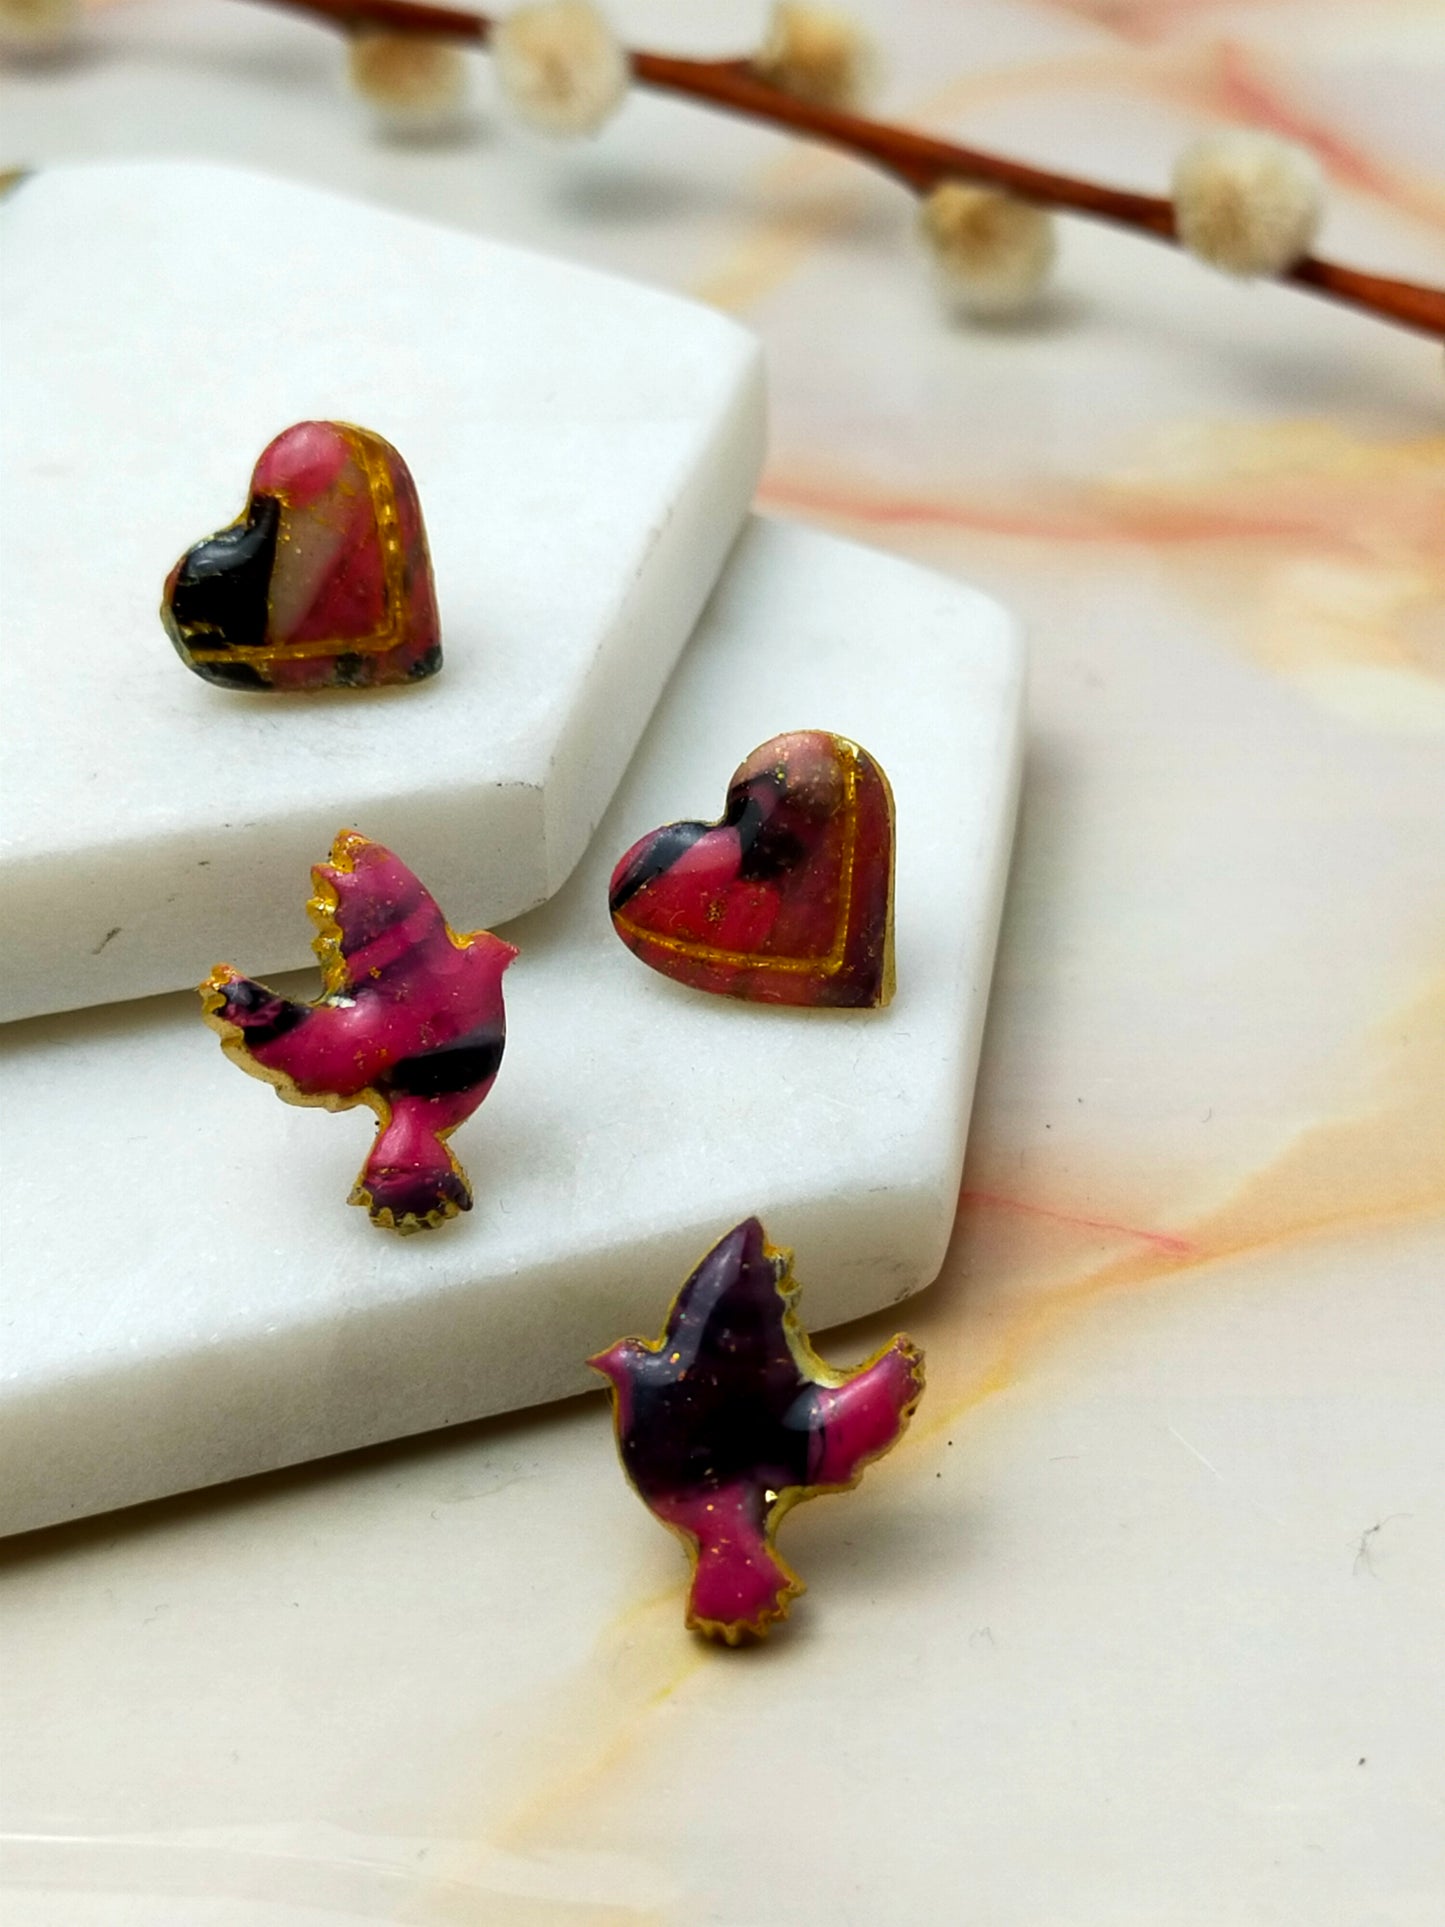 "Paloma" 2 Pack Set - Hearts Stud Earrings and Love Bird Stud Earrings - Valentine's Collection